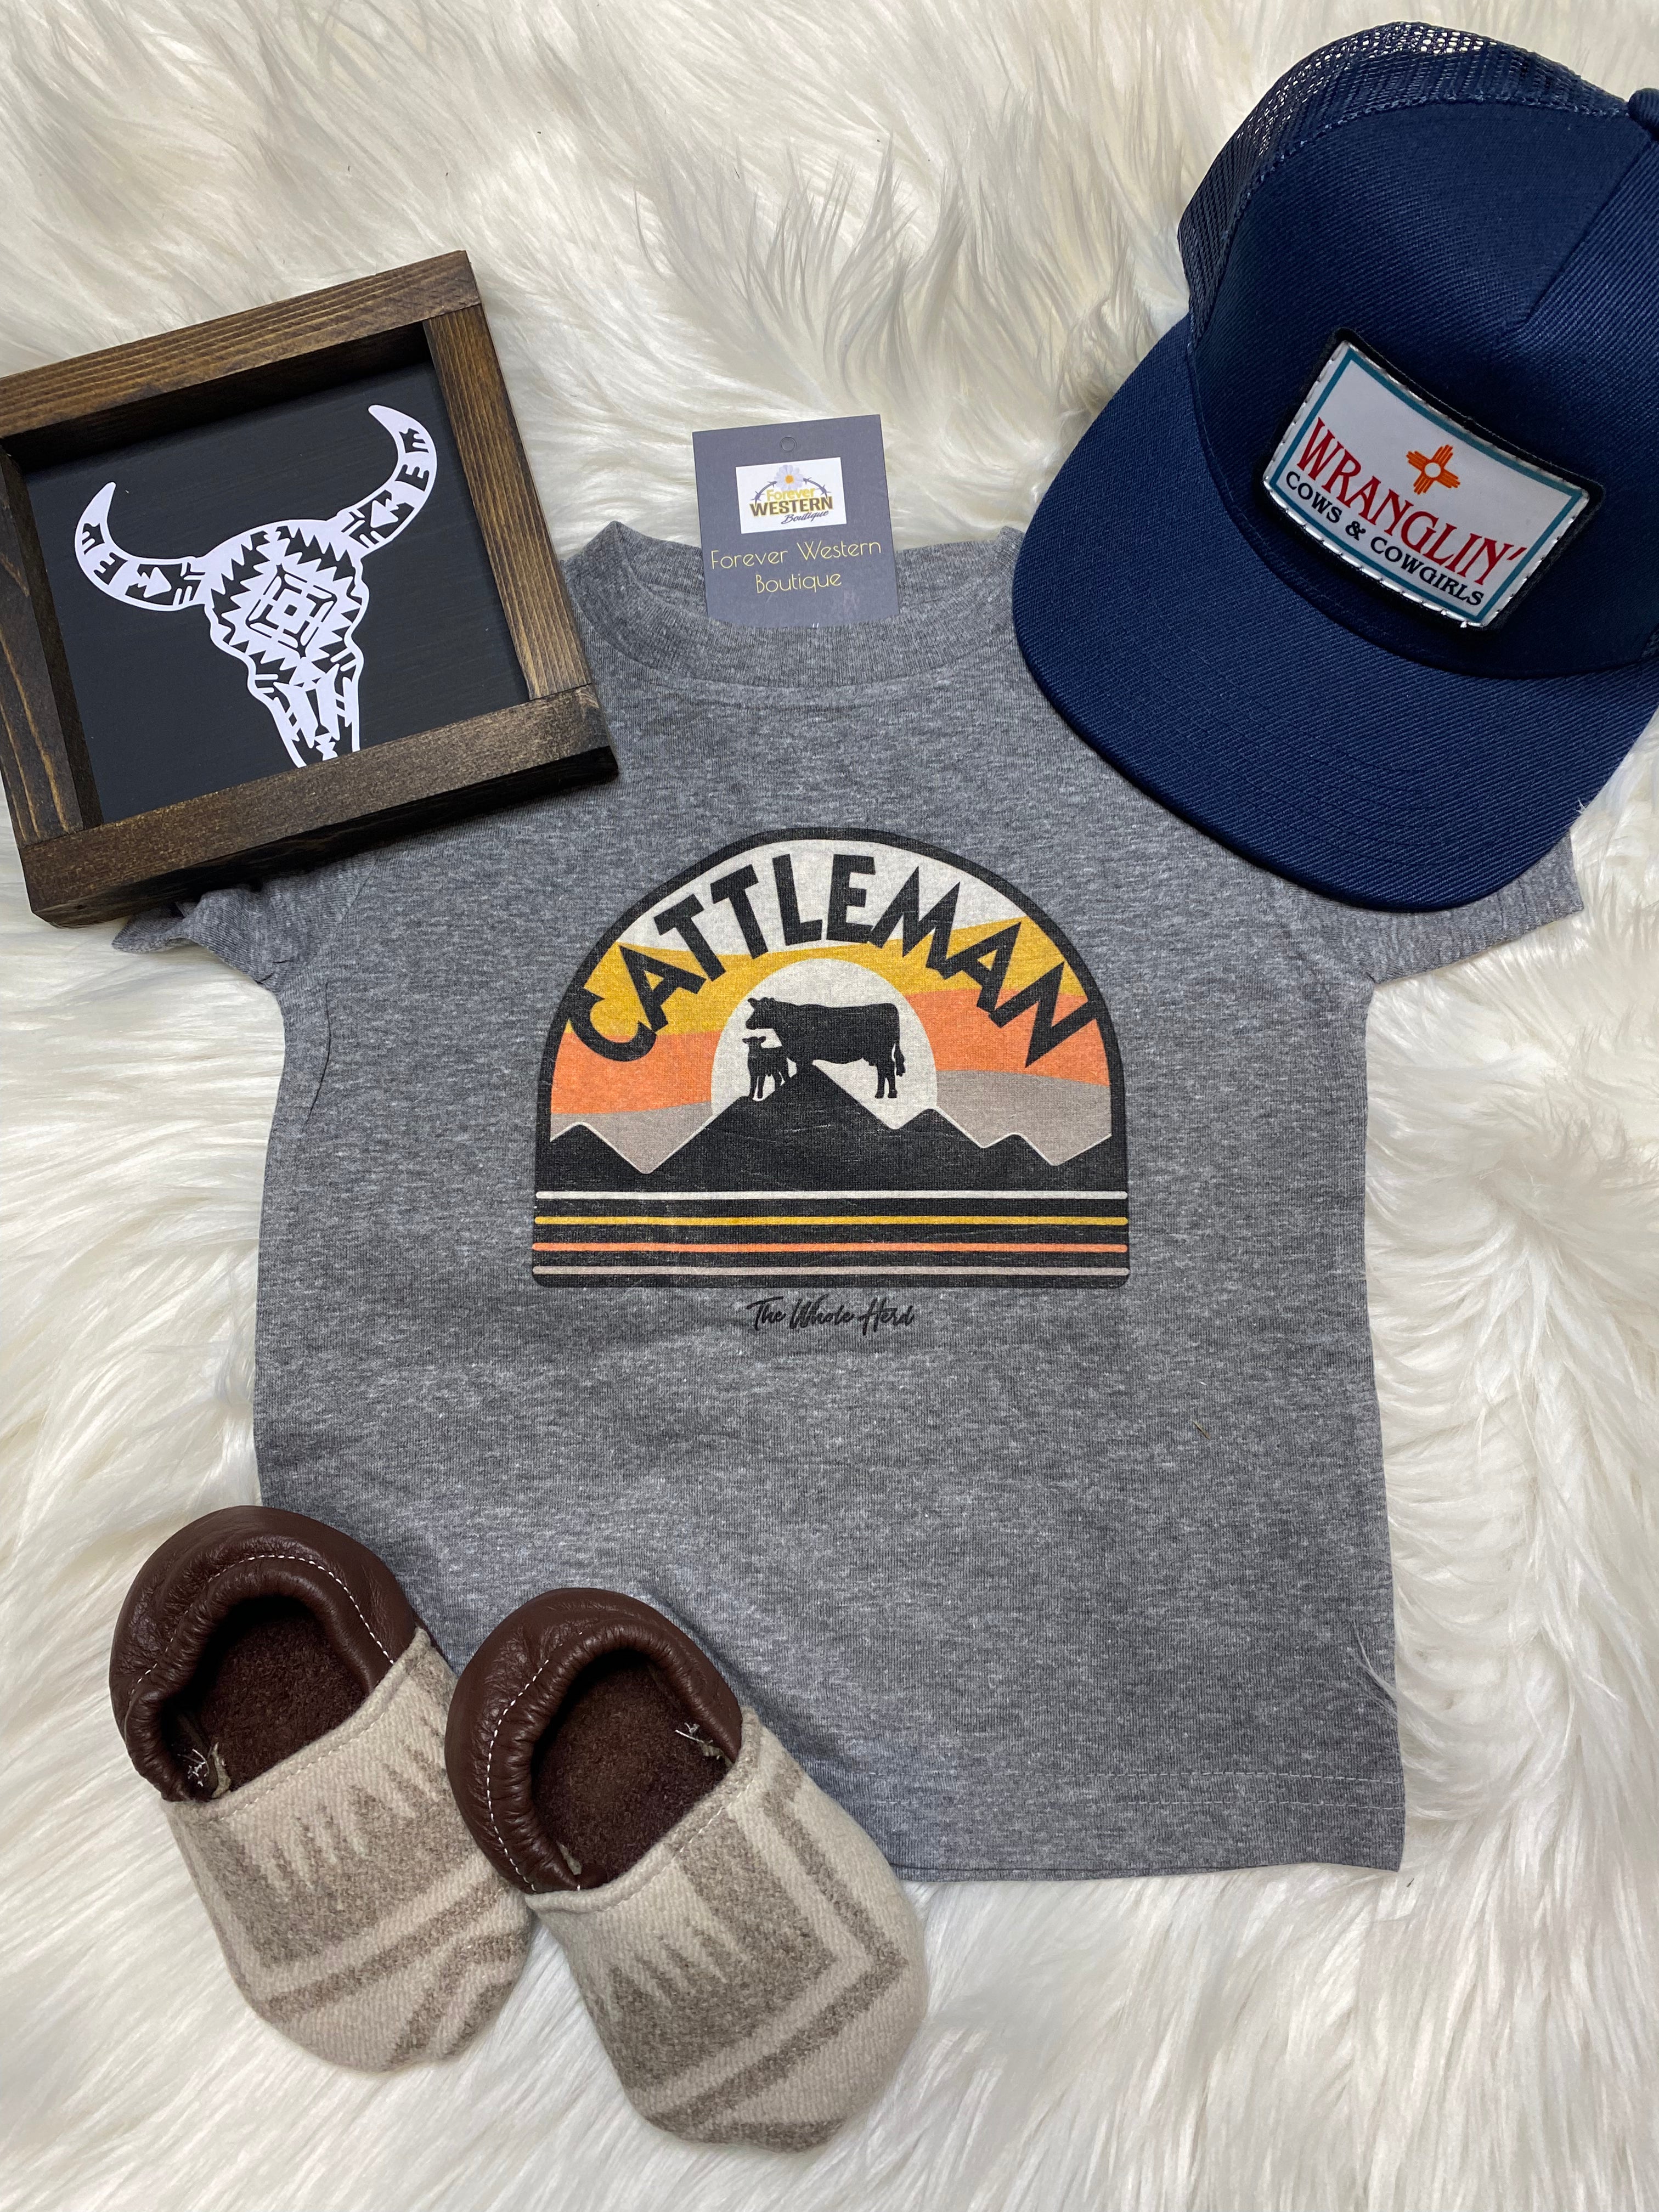 Cattleman Kids Tee - Forever Western Boutique